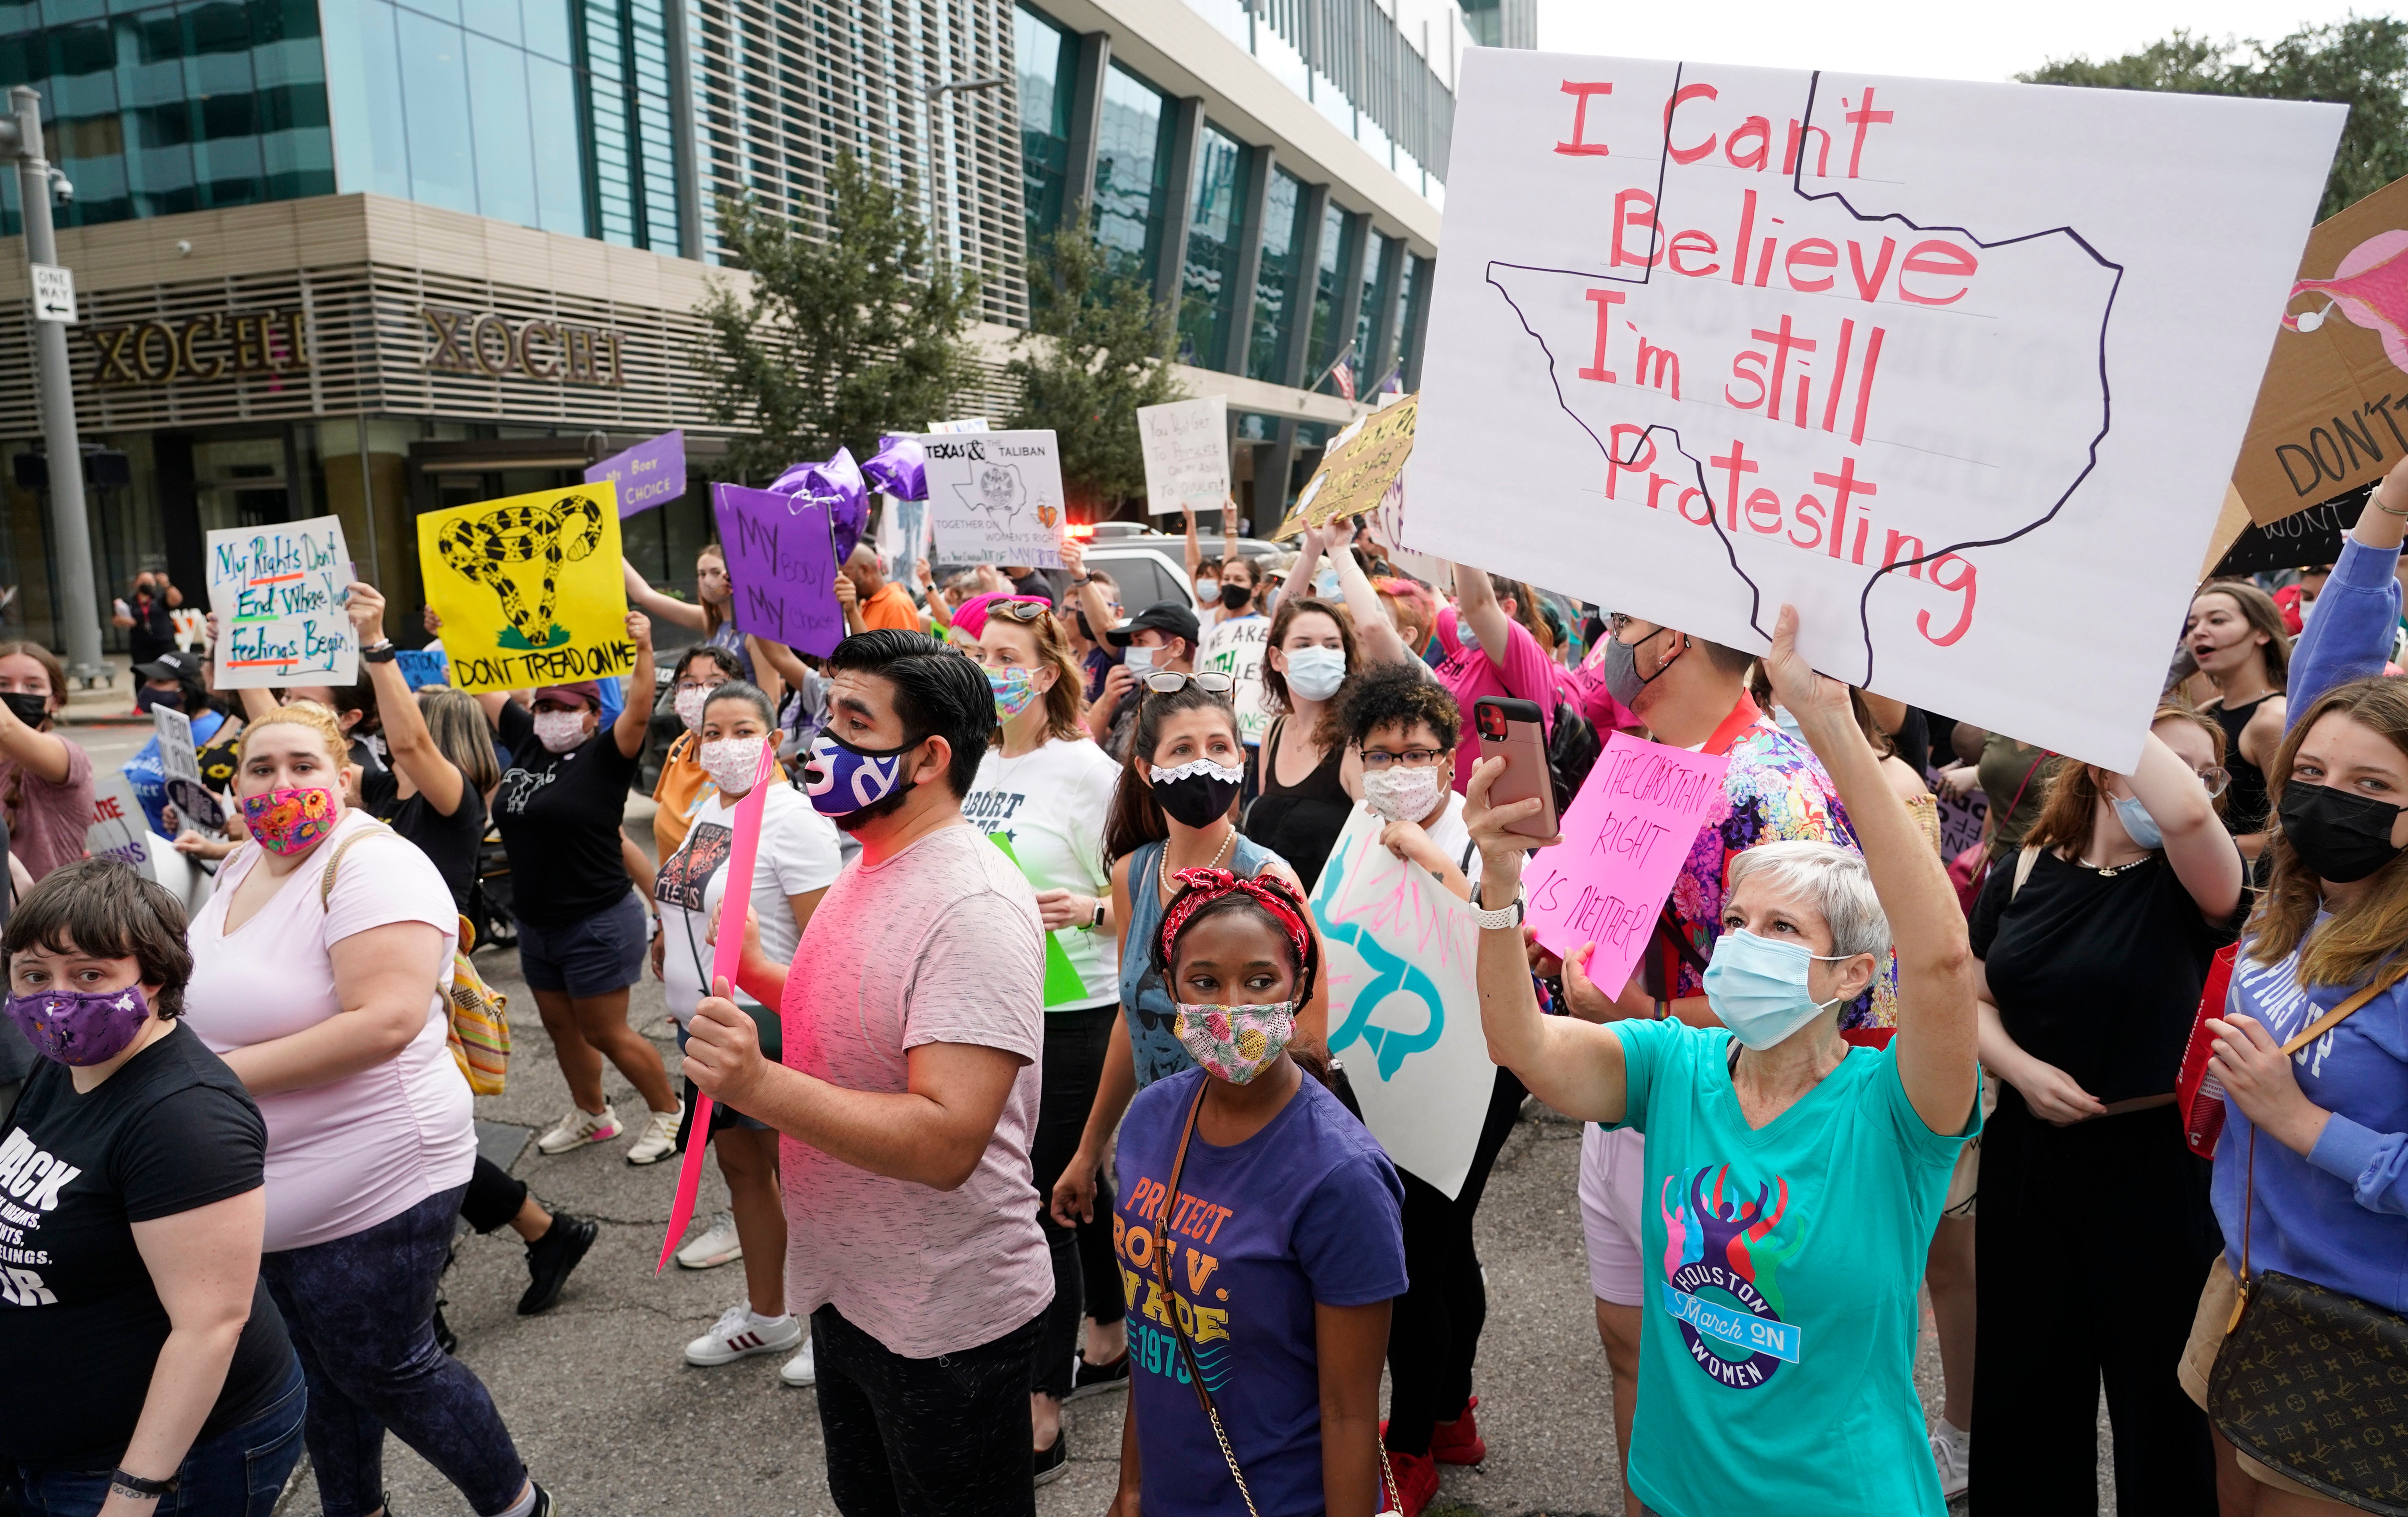 People participate in the Houston Women's March against Texas abortion ban walk from Discovery Green to City Hall in Houston.